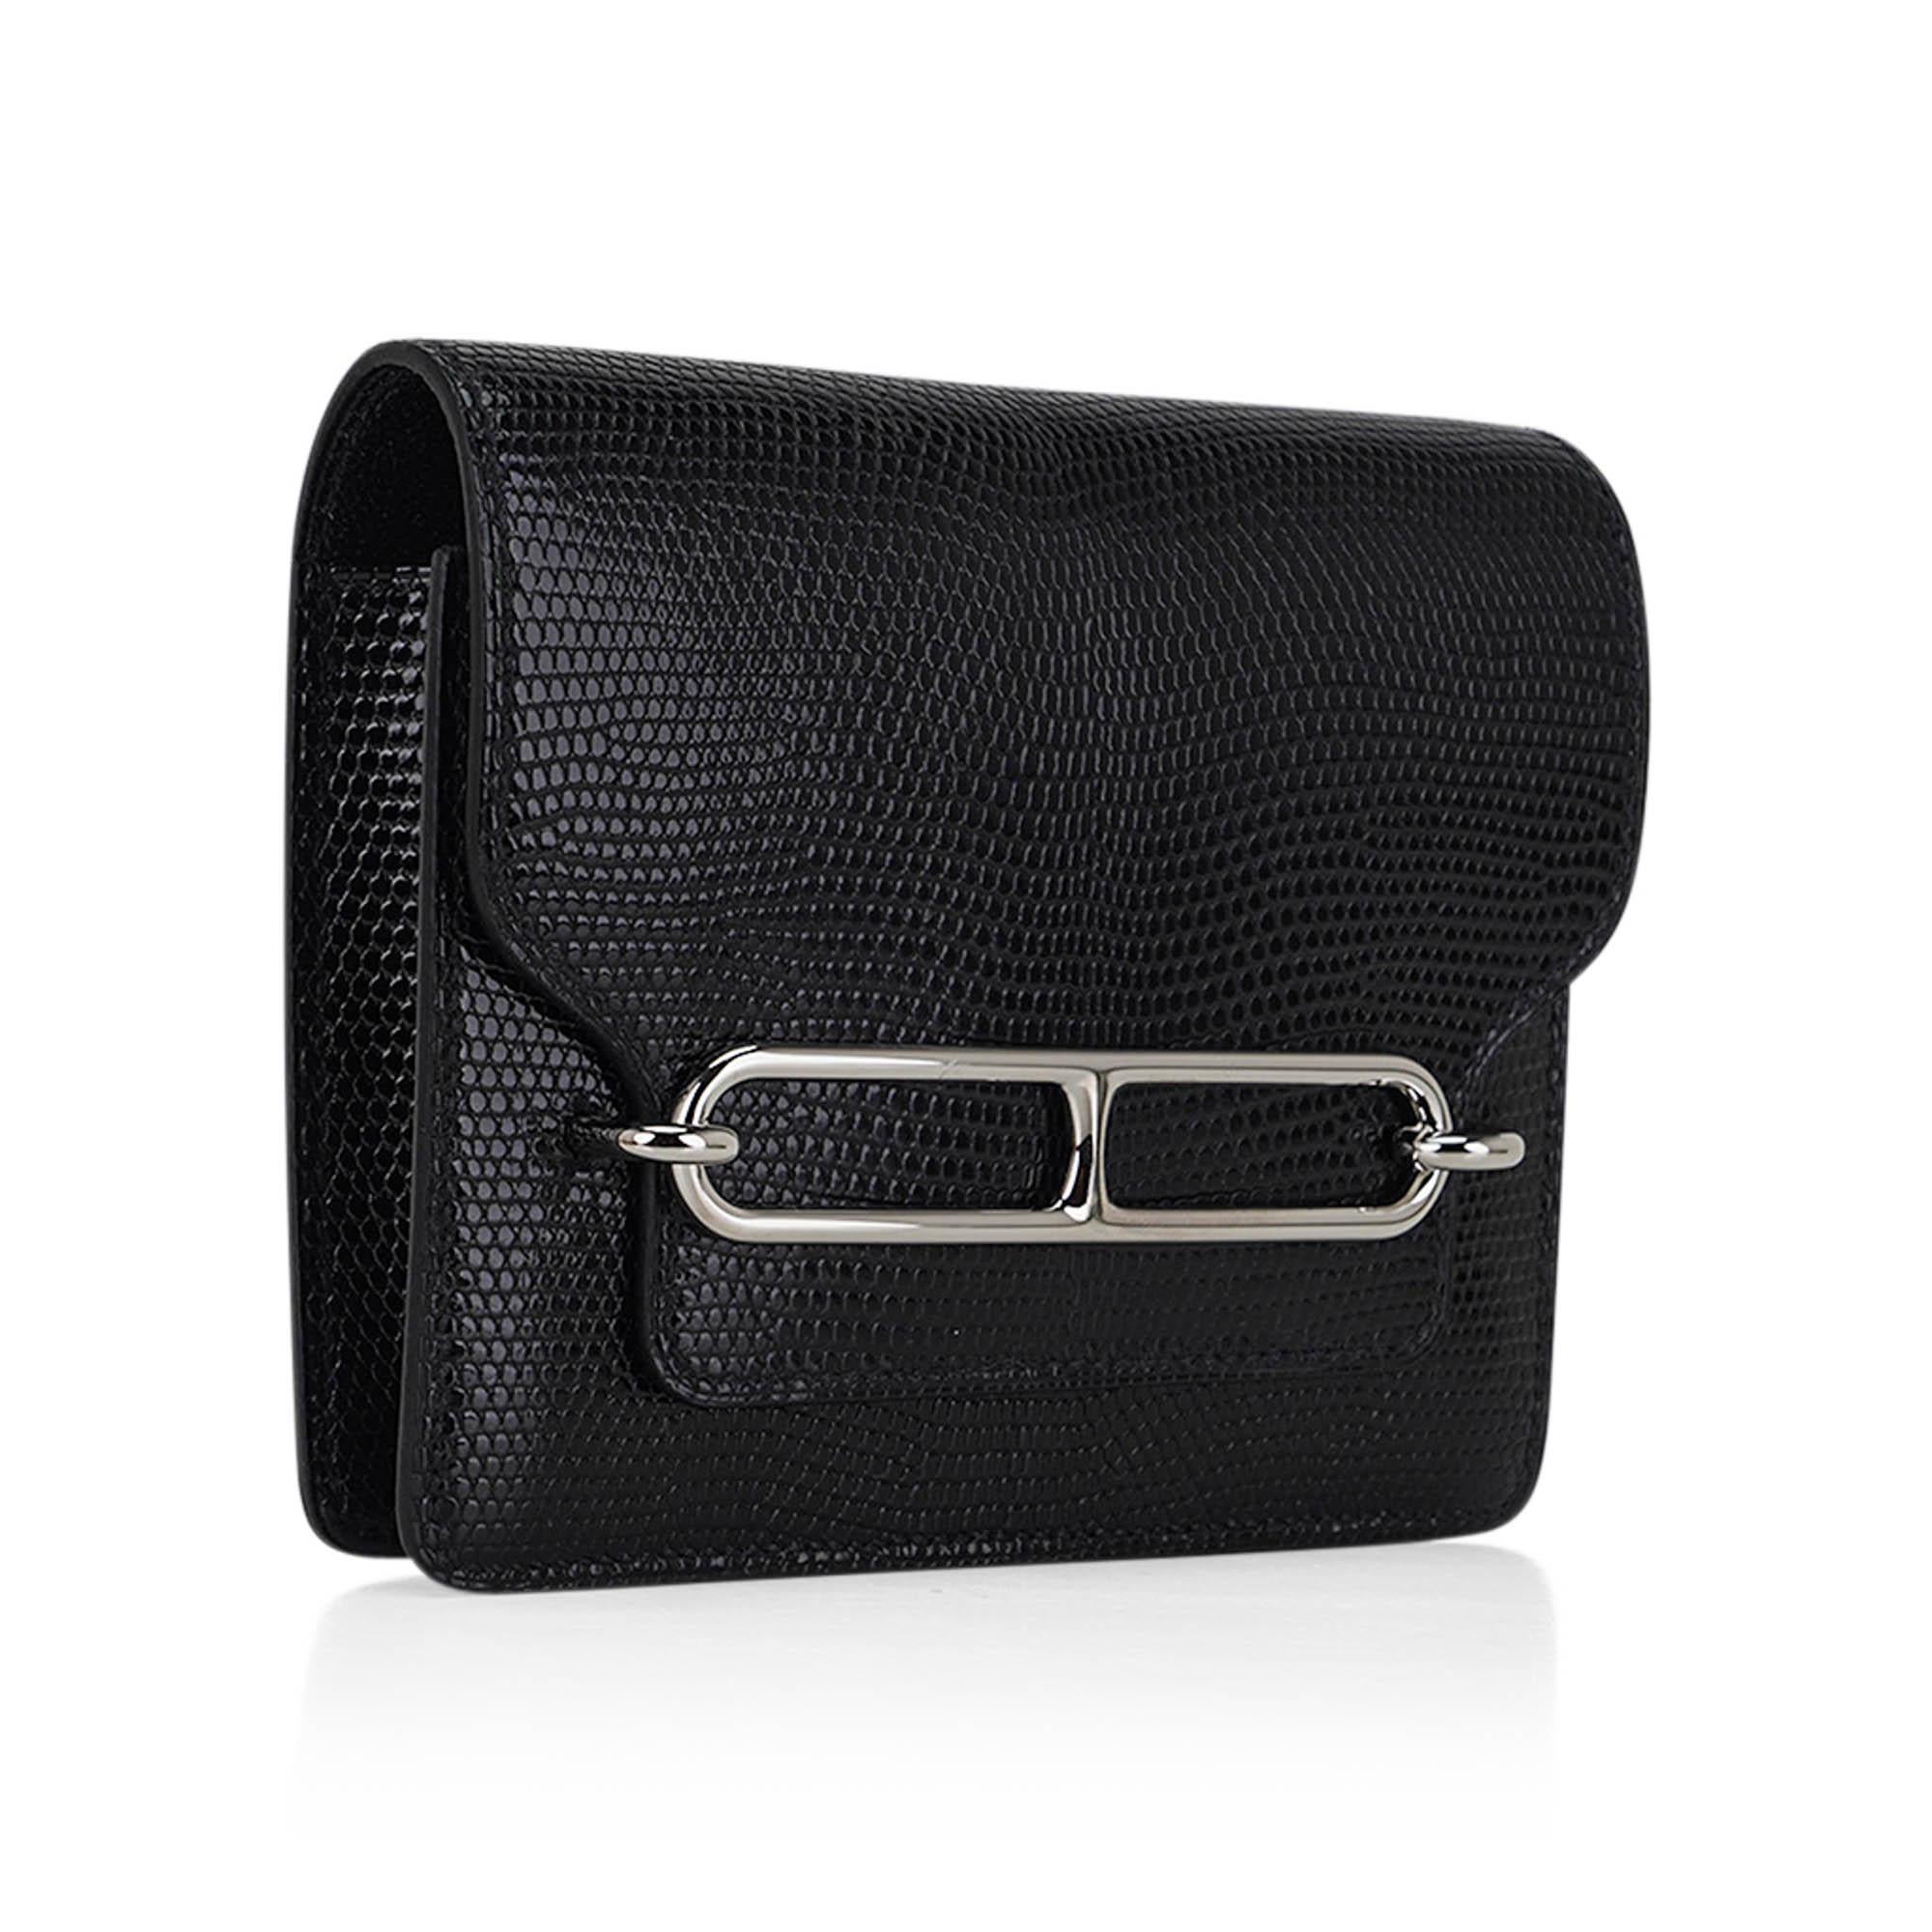 Mightychic offers an Hermes Roulis Slim Wallet Belt bag featured in Black Lizard.
Sleek and crisp with Palladium hardware.
Includes removable zipped change purse and 2 credit card slots.
Fits up to a 42mm Hermes Belt.
Comes with sleeper and